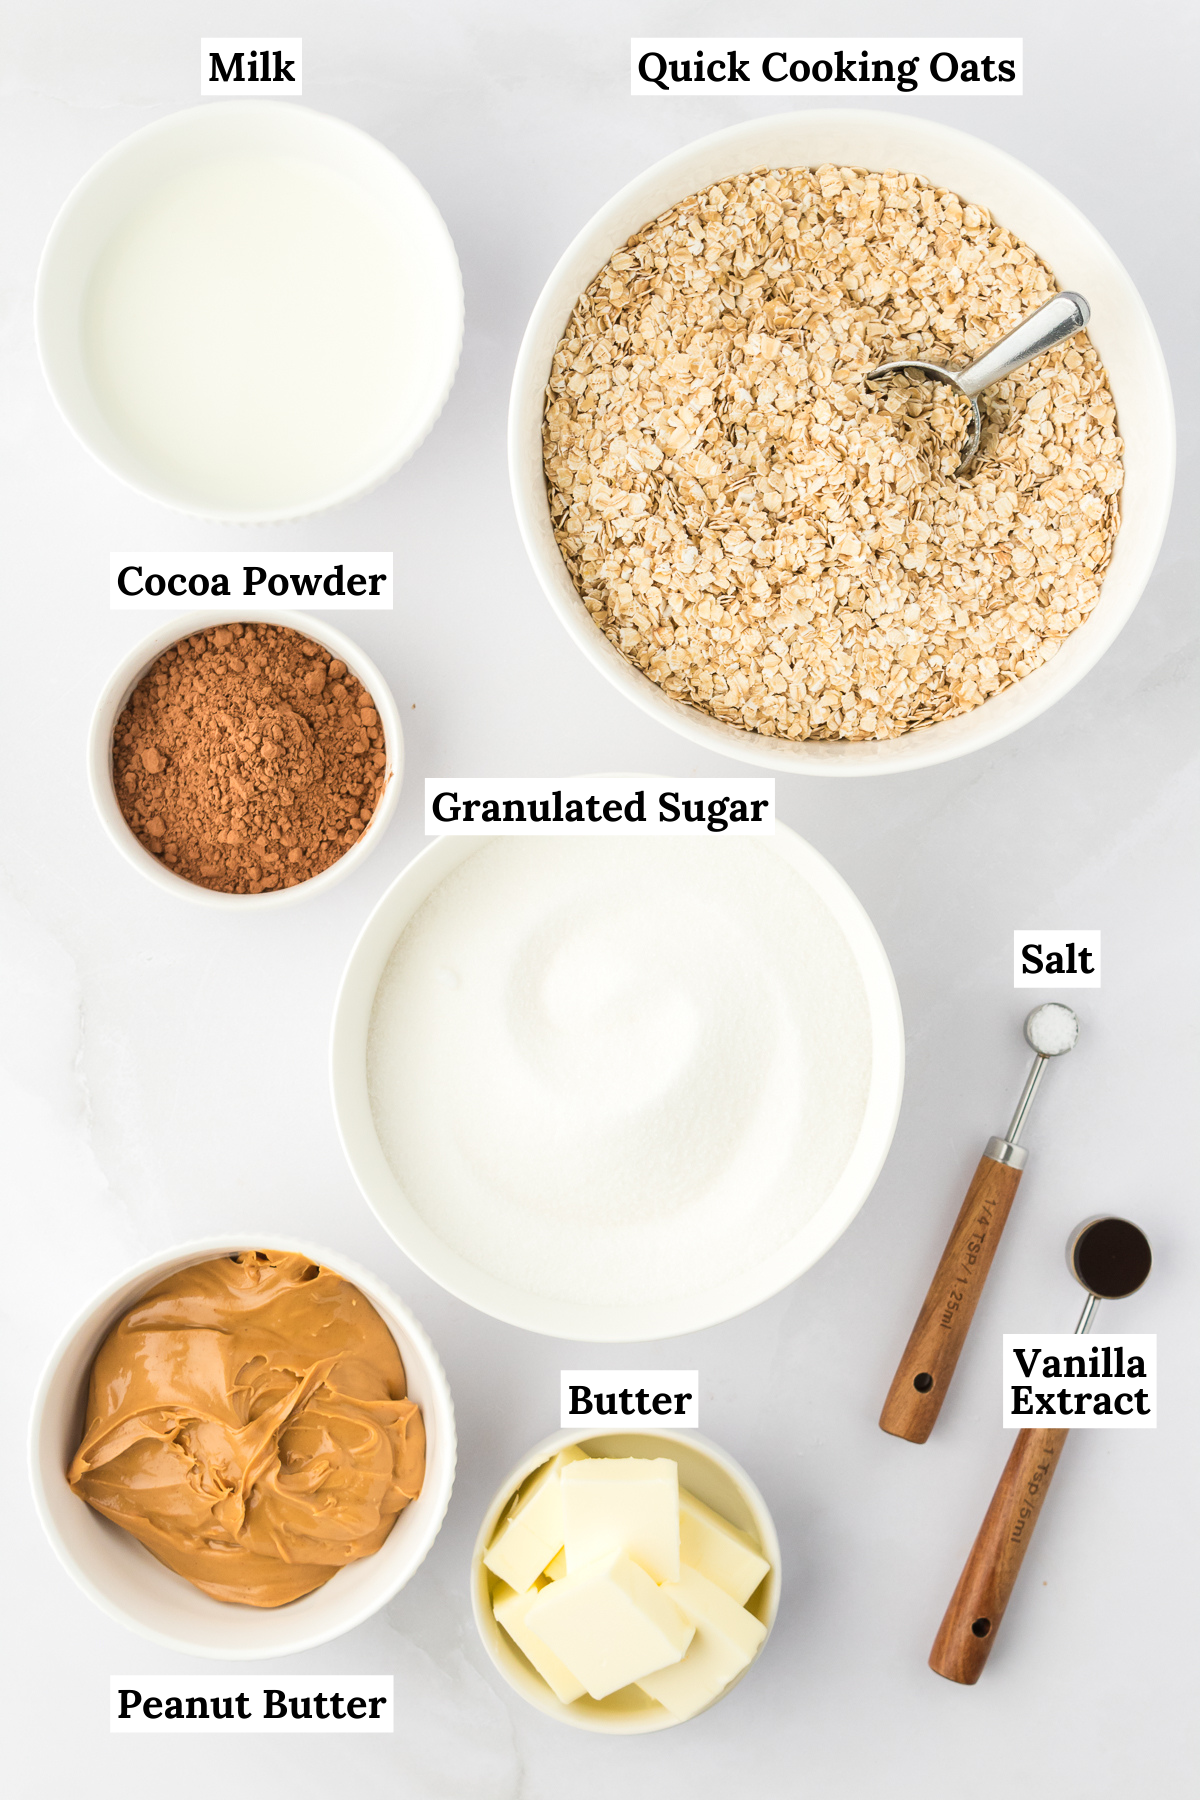 ingredients for no bake cookies including milk, quick cooking oats, cocoa powder, granulated sugar, salt, vanilla extract, butter, and peanut butter